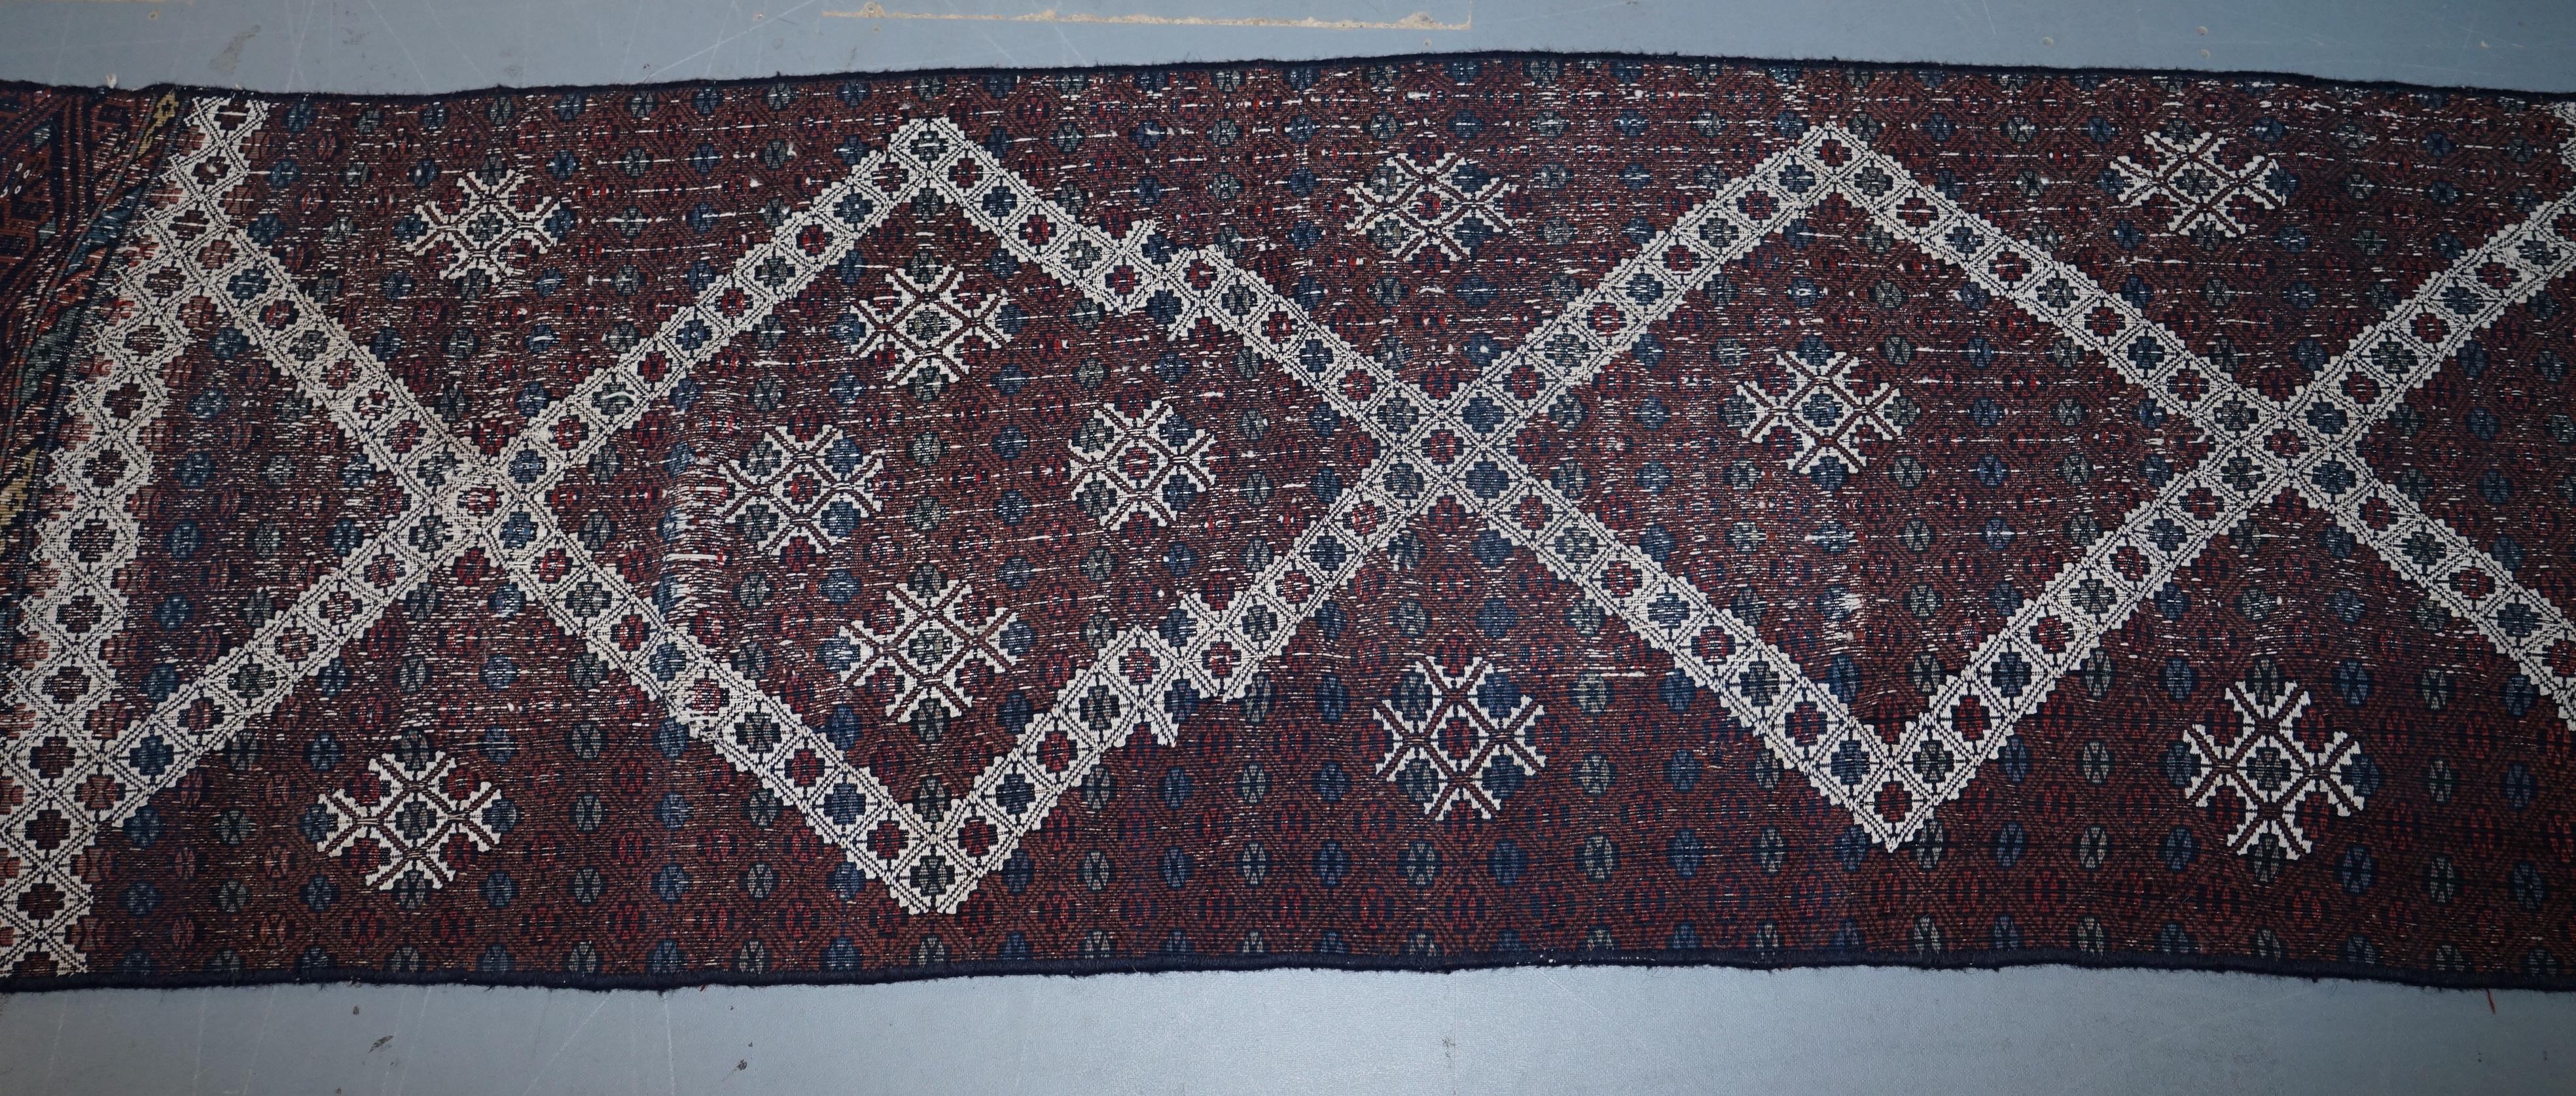 Wool Very Old Antique Hand Knotted Runner Rug Stunning Kilim Country House Charming For Sale